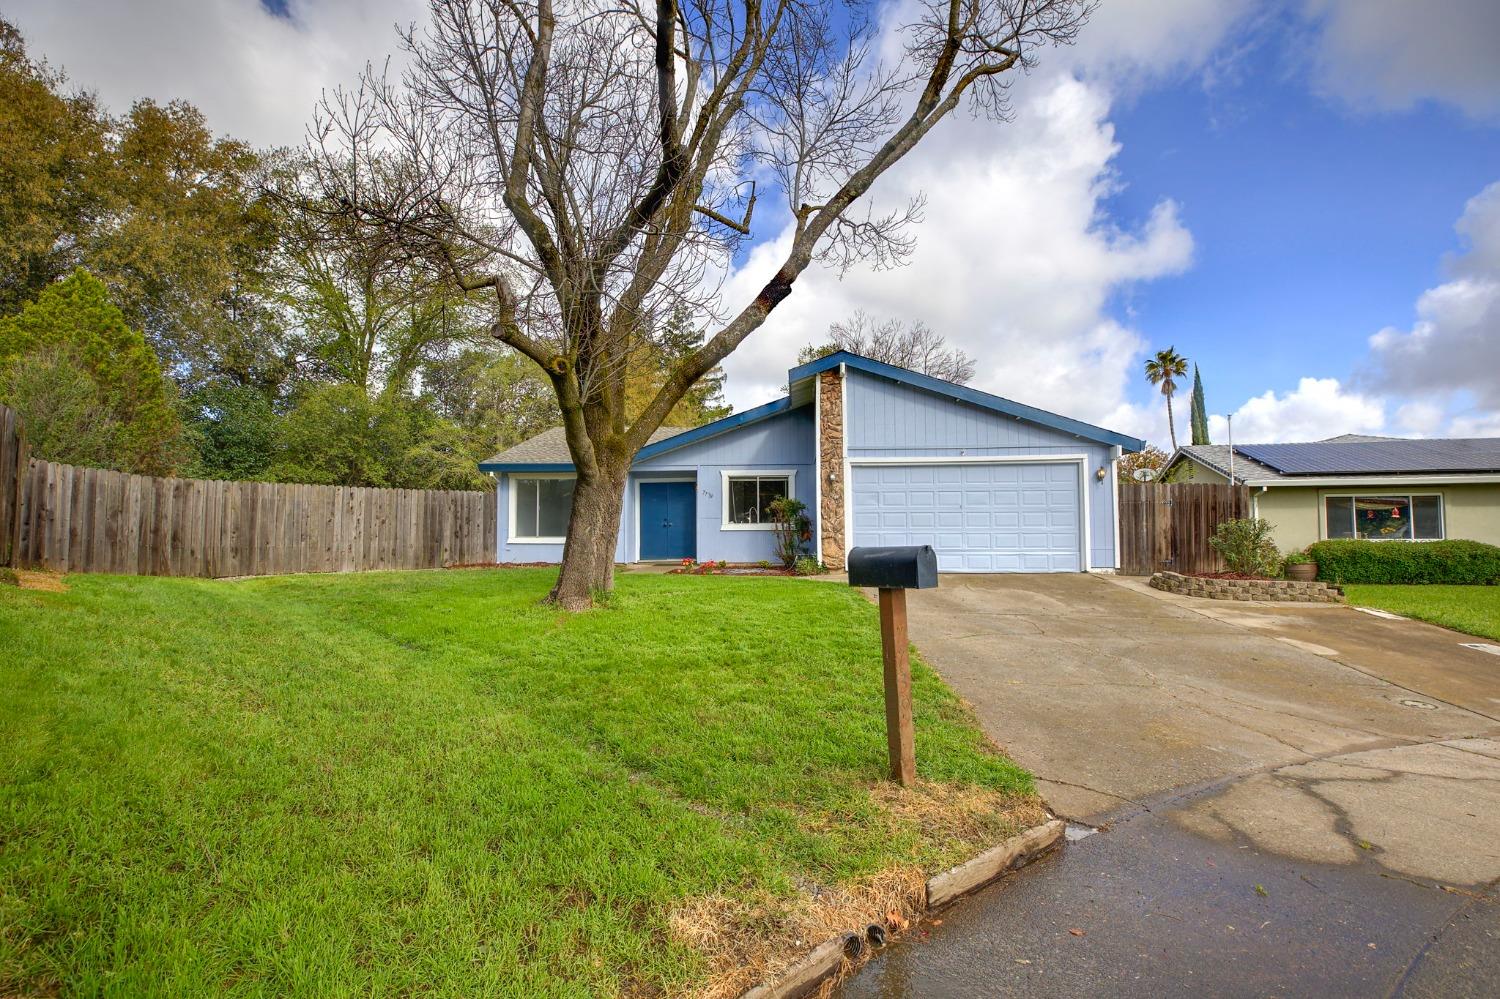 Photo of 7739 Claypool Wy in Citrus Heights, CA